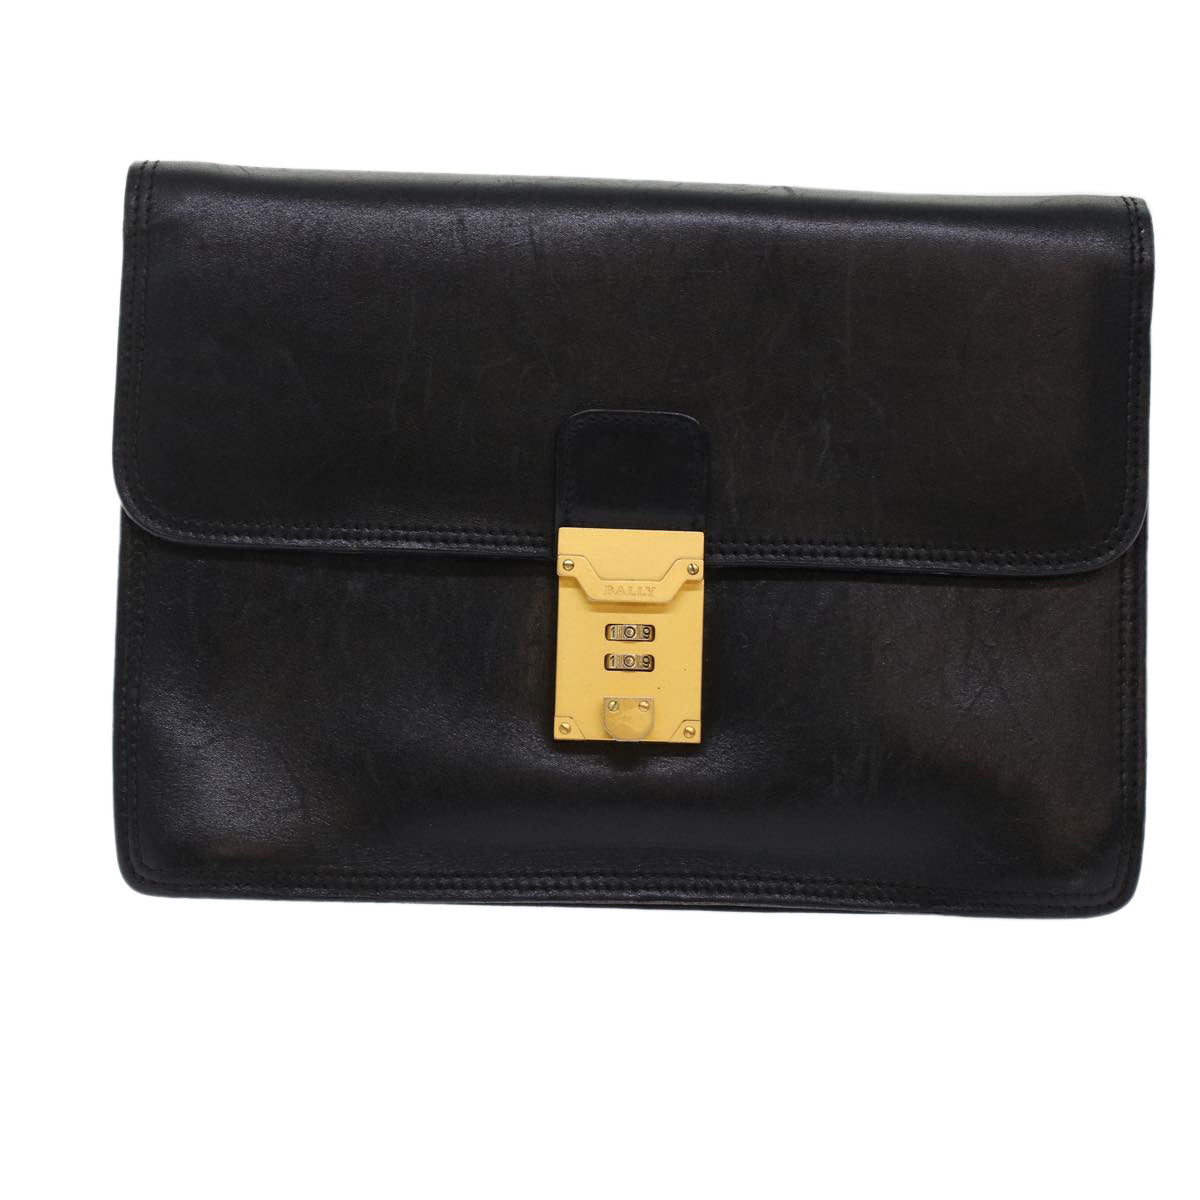 BALLY Clutch Bag Leather 2Set Black Auth bs6963 - 0